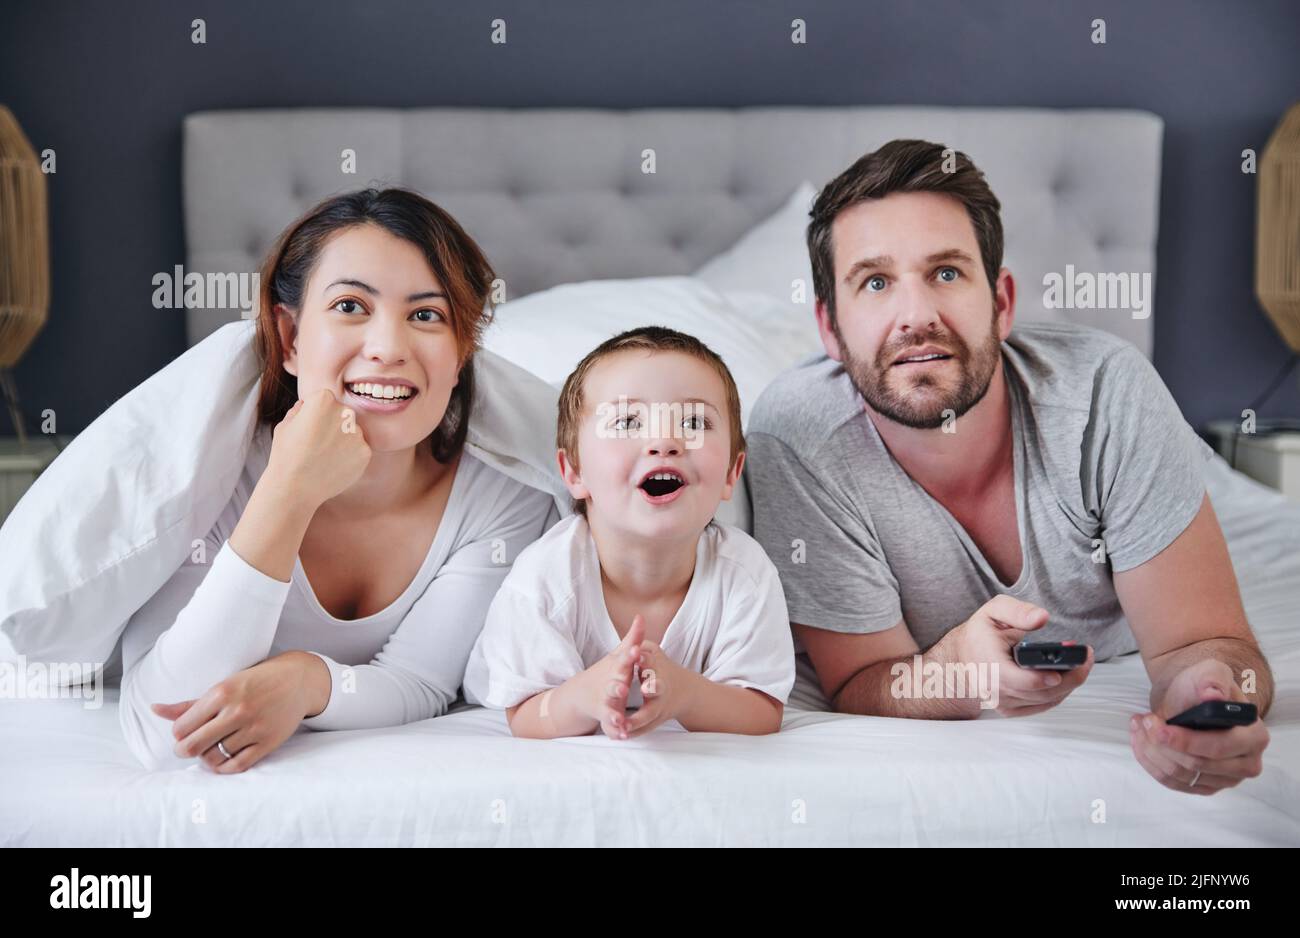 Glued to the tv for the day. Shot of a young family watching tv together at home. Stock Photo